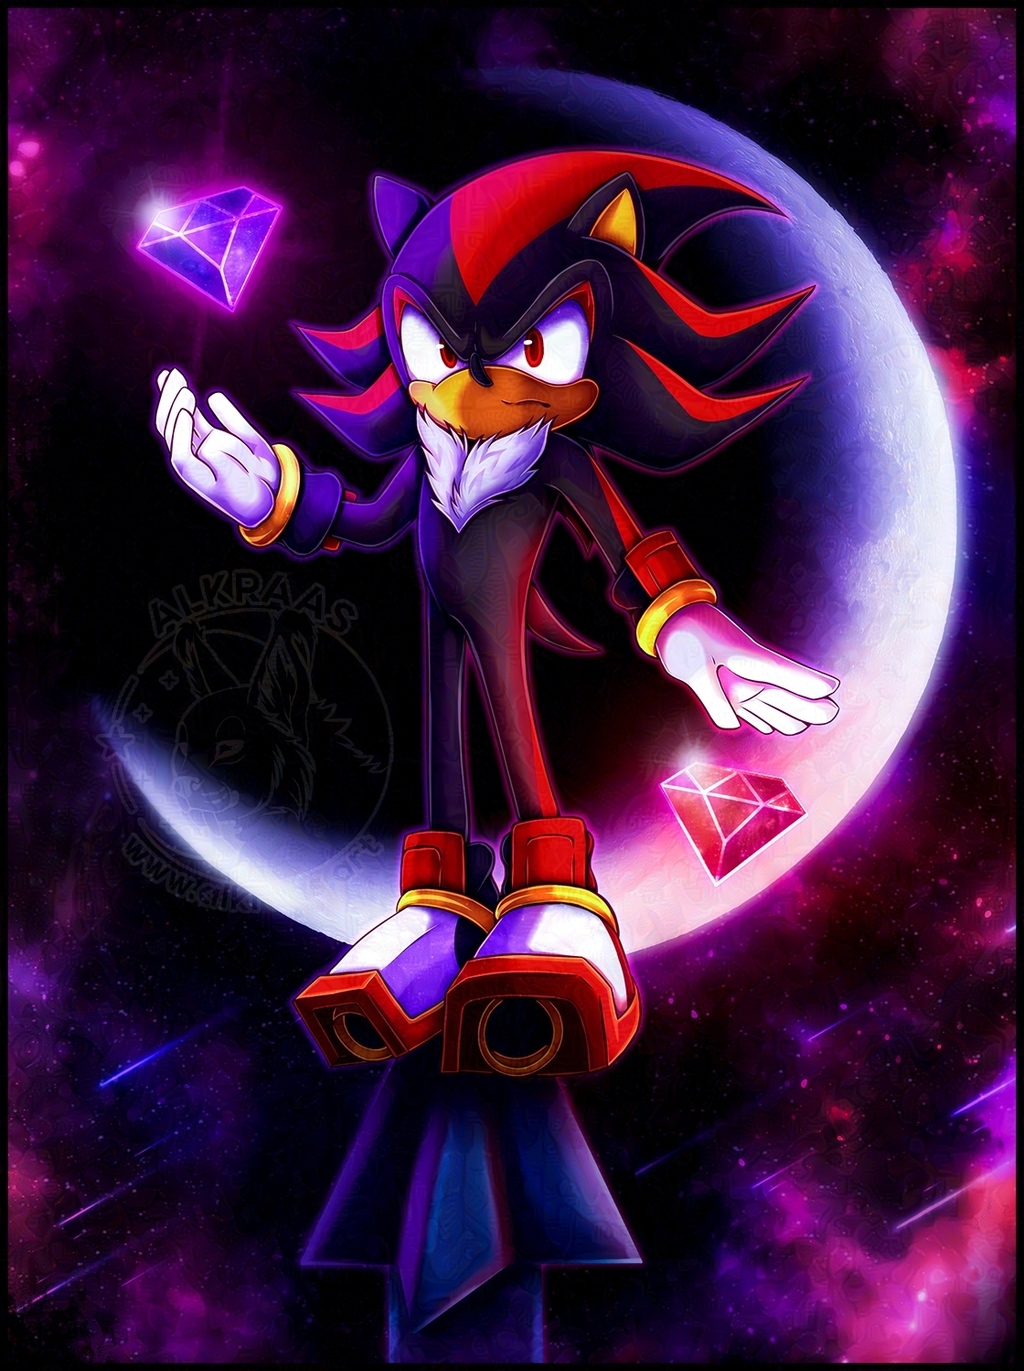 Most recent image: Shadow